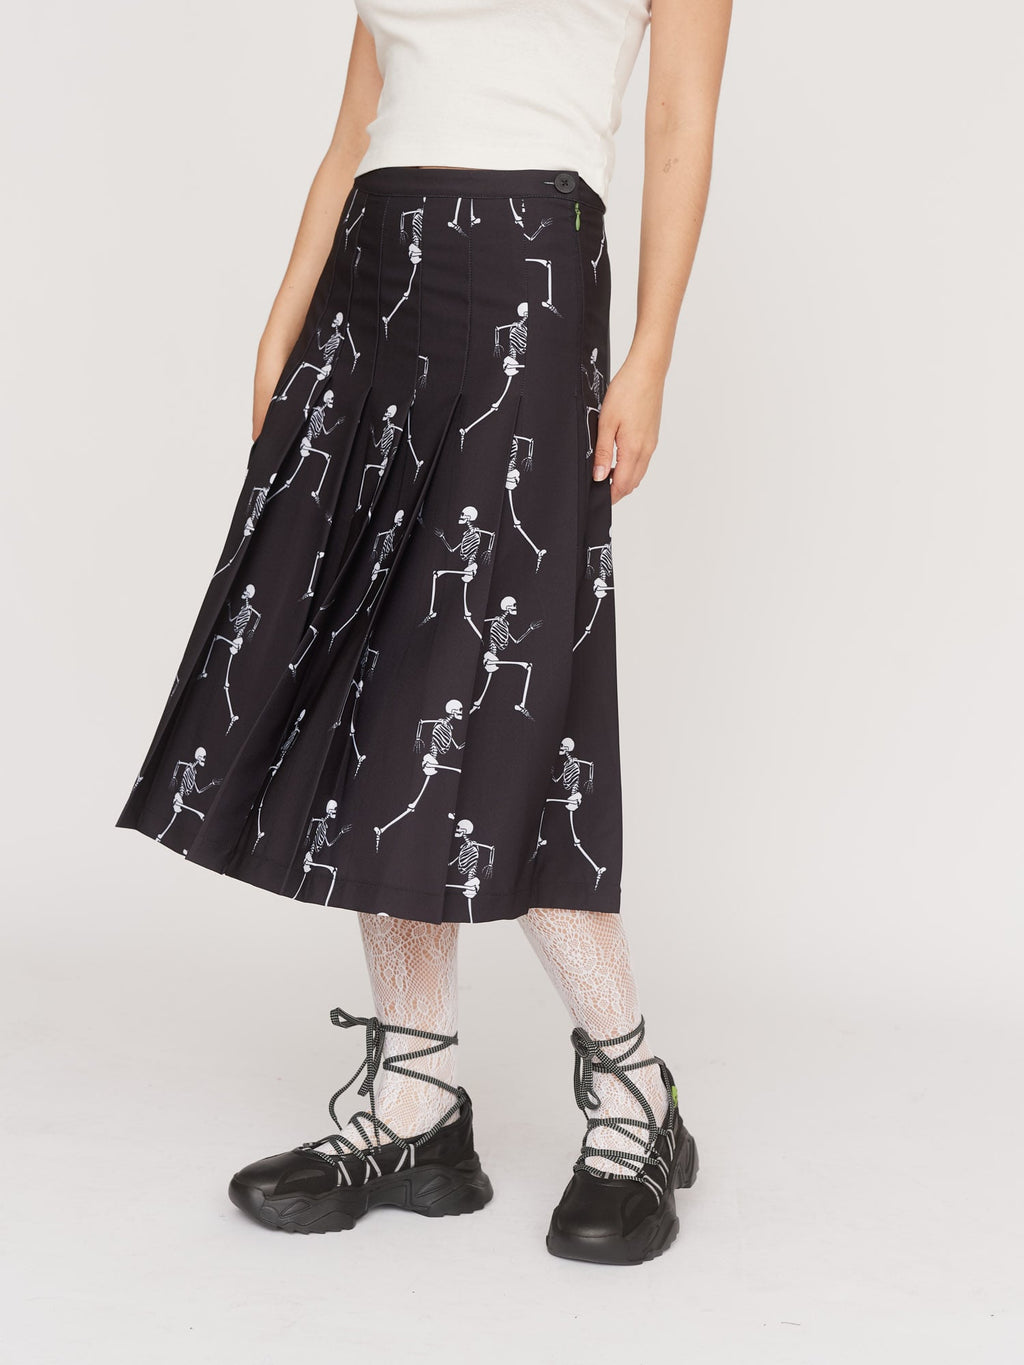  Collection-women-landing, collection-women-new-in-1, Collection-women-skirts